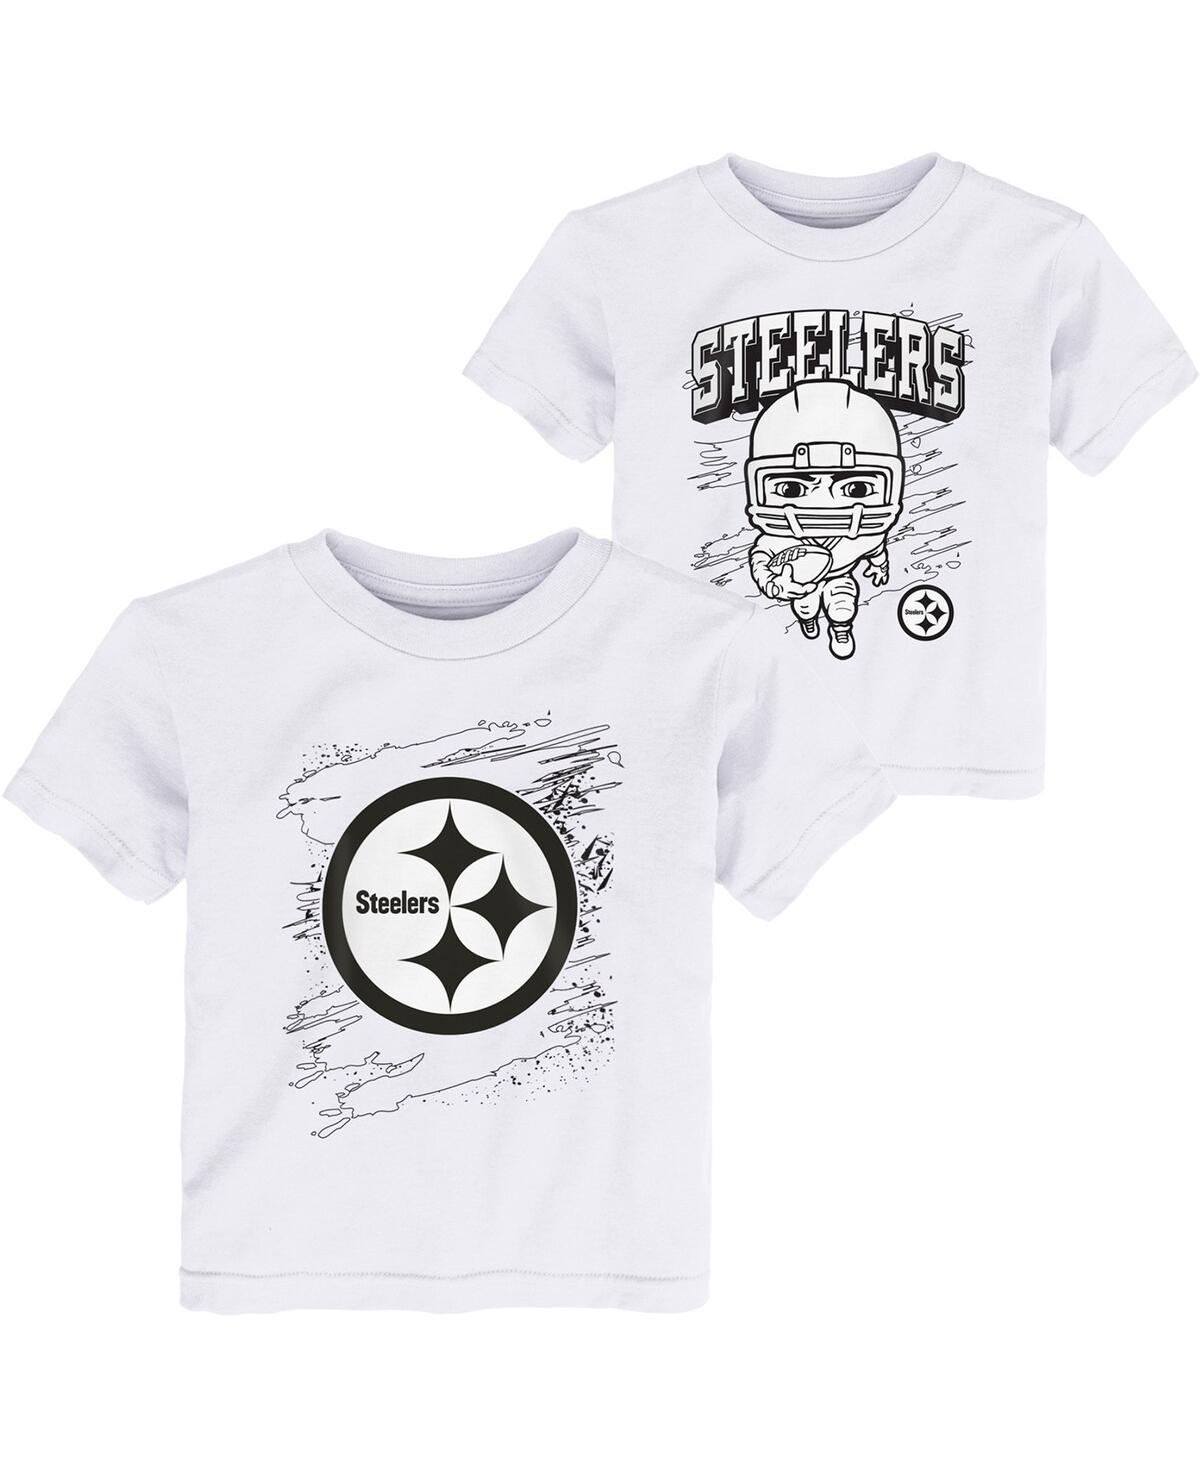 Outerstuff Babies' Toddler Boys White Pittsburgh Steelers Coloring Activity Two-pack T-shirt Set